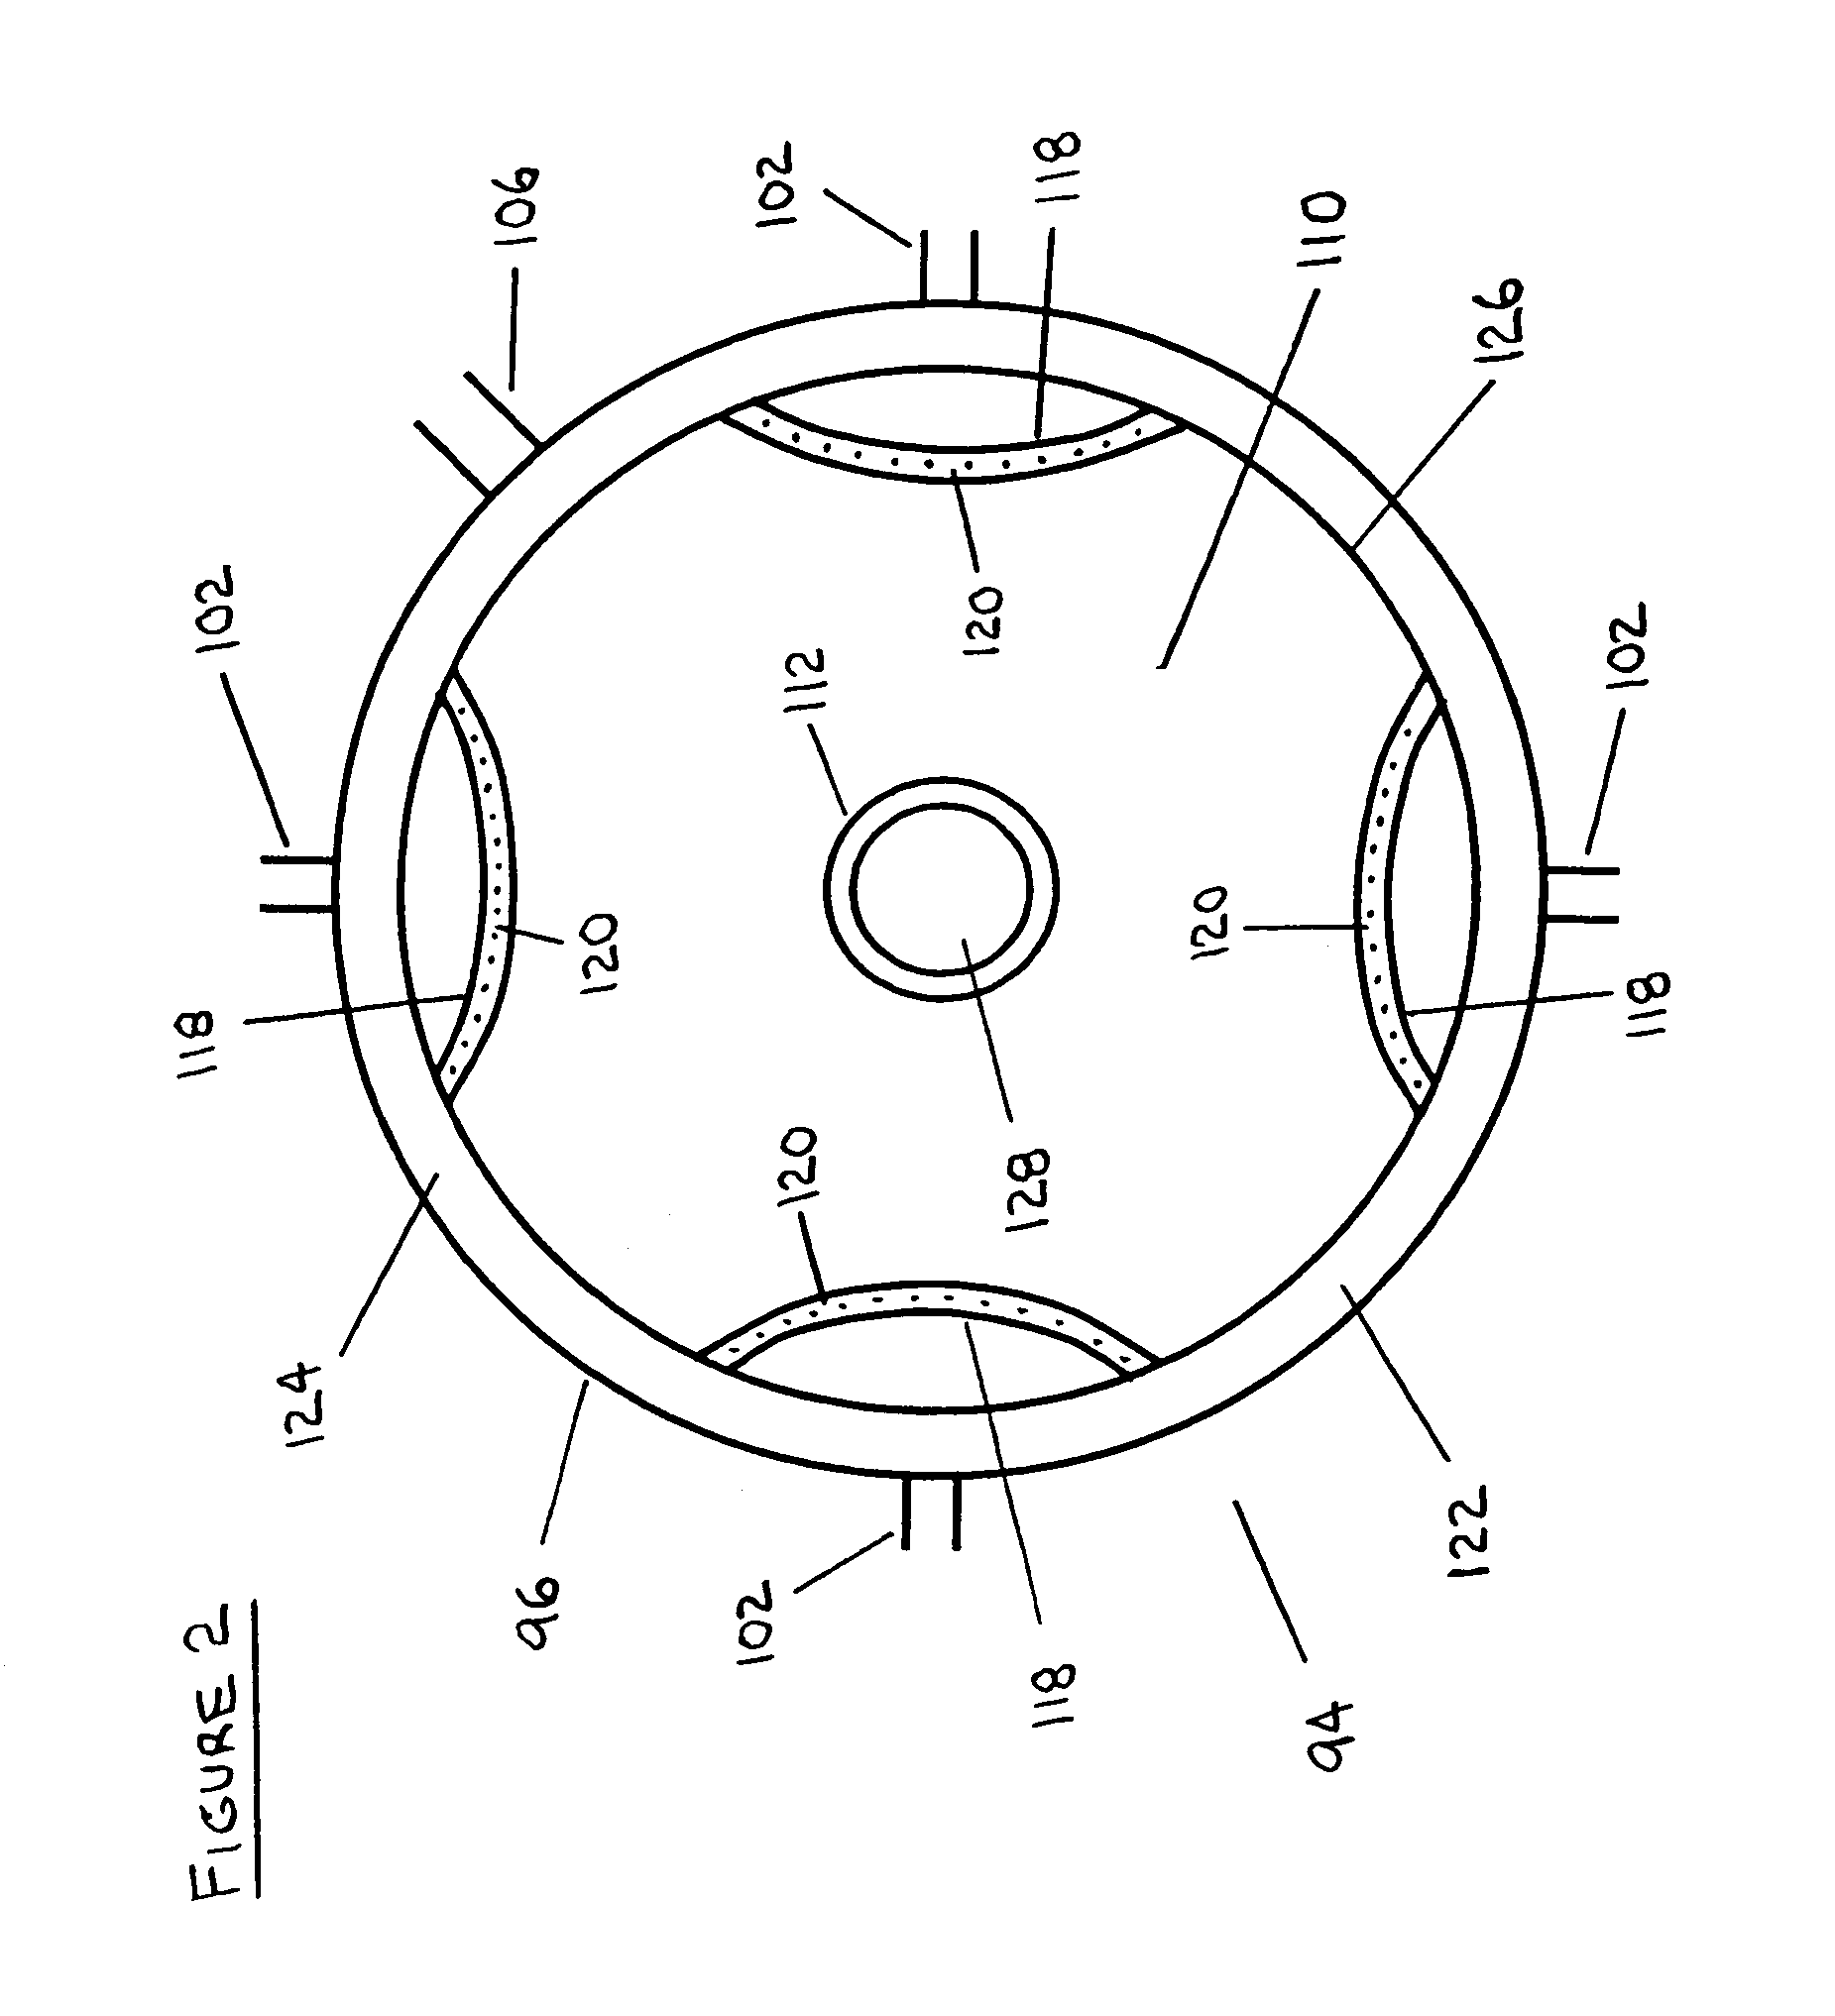 Process and apparatus for treating tailings